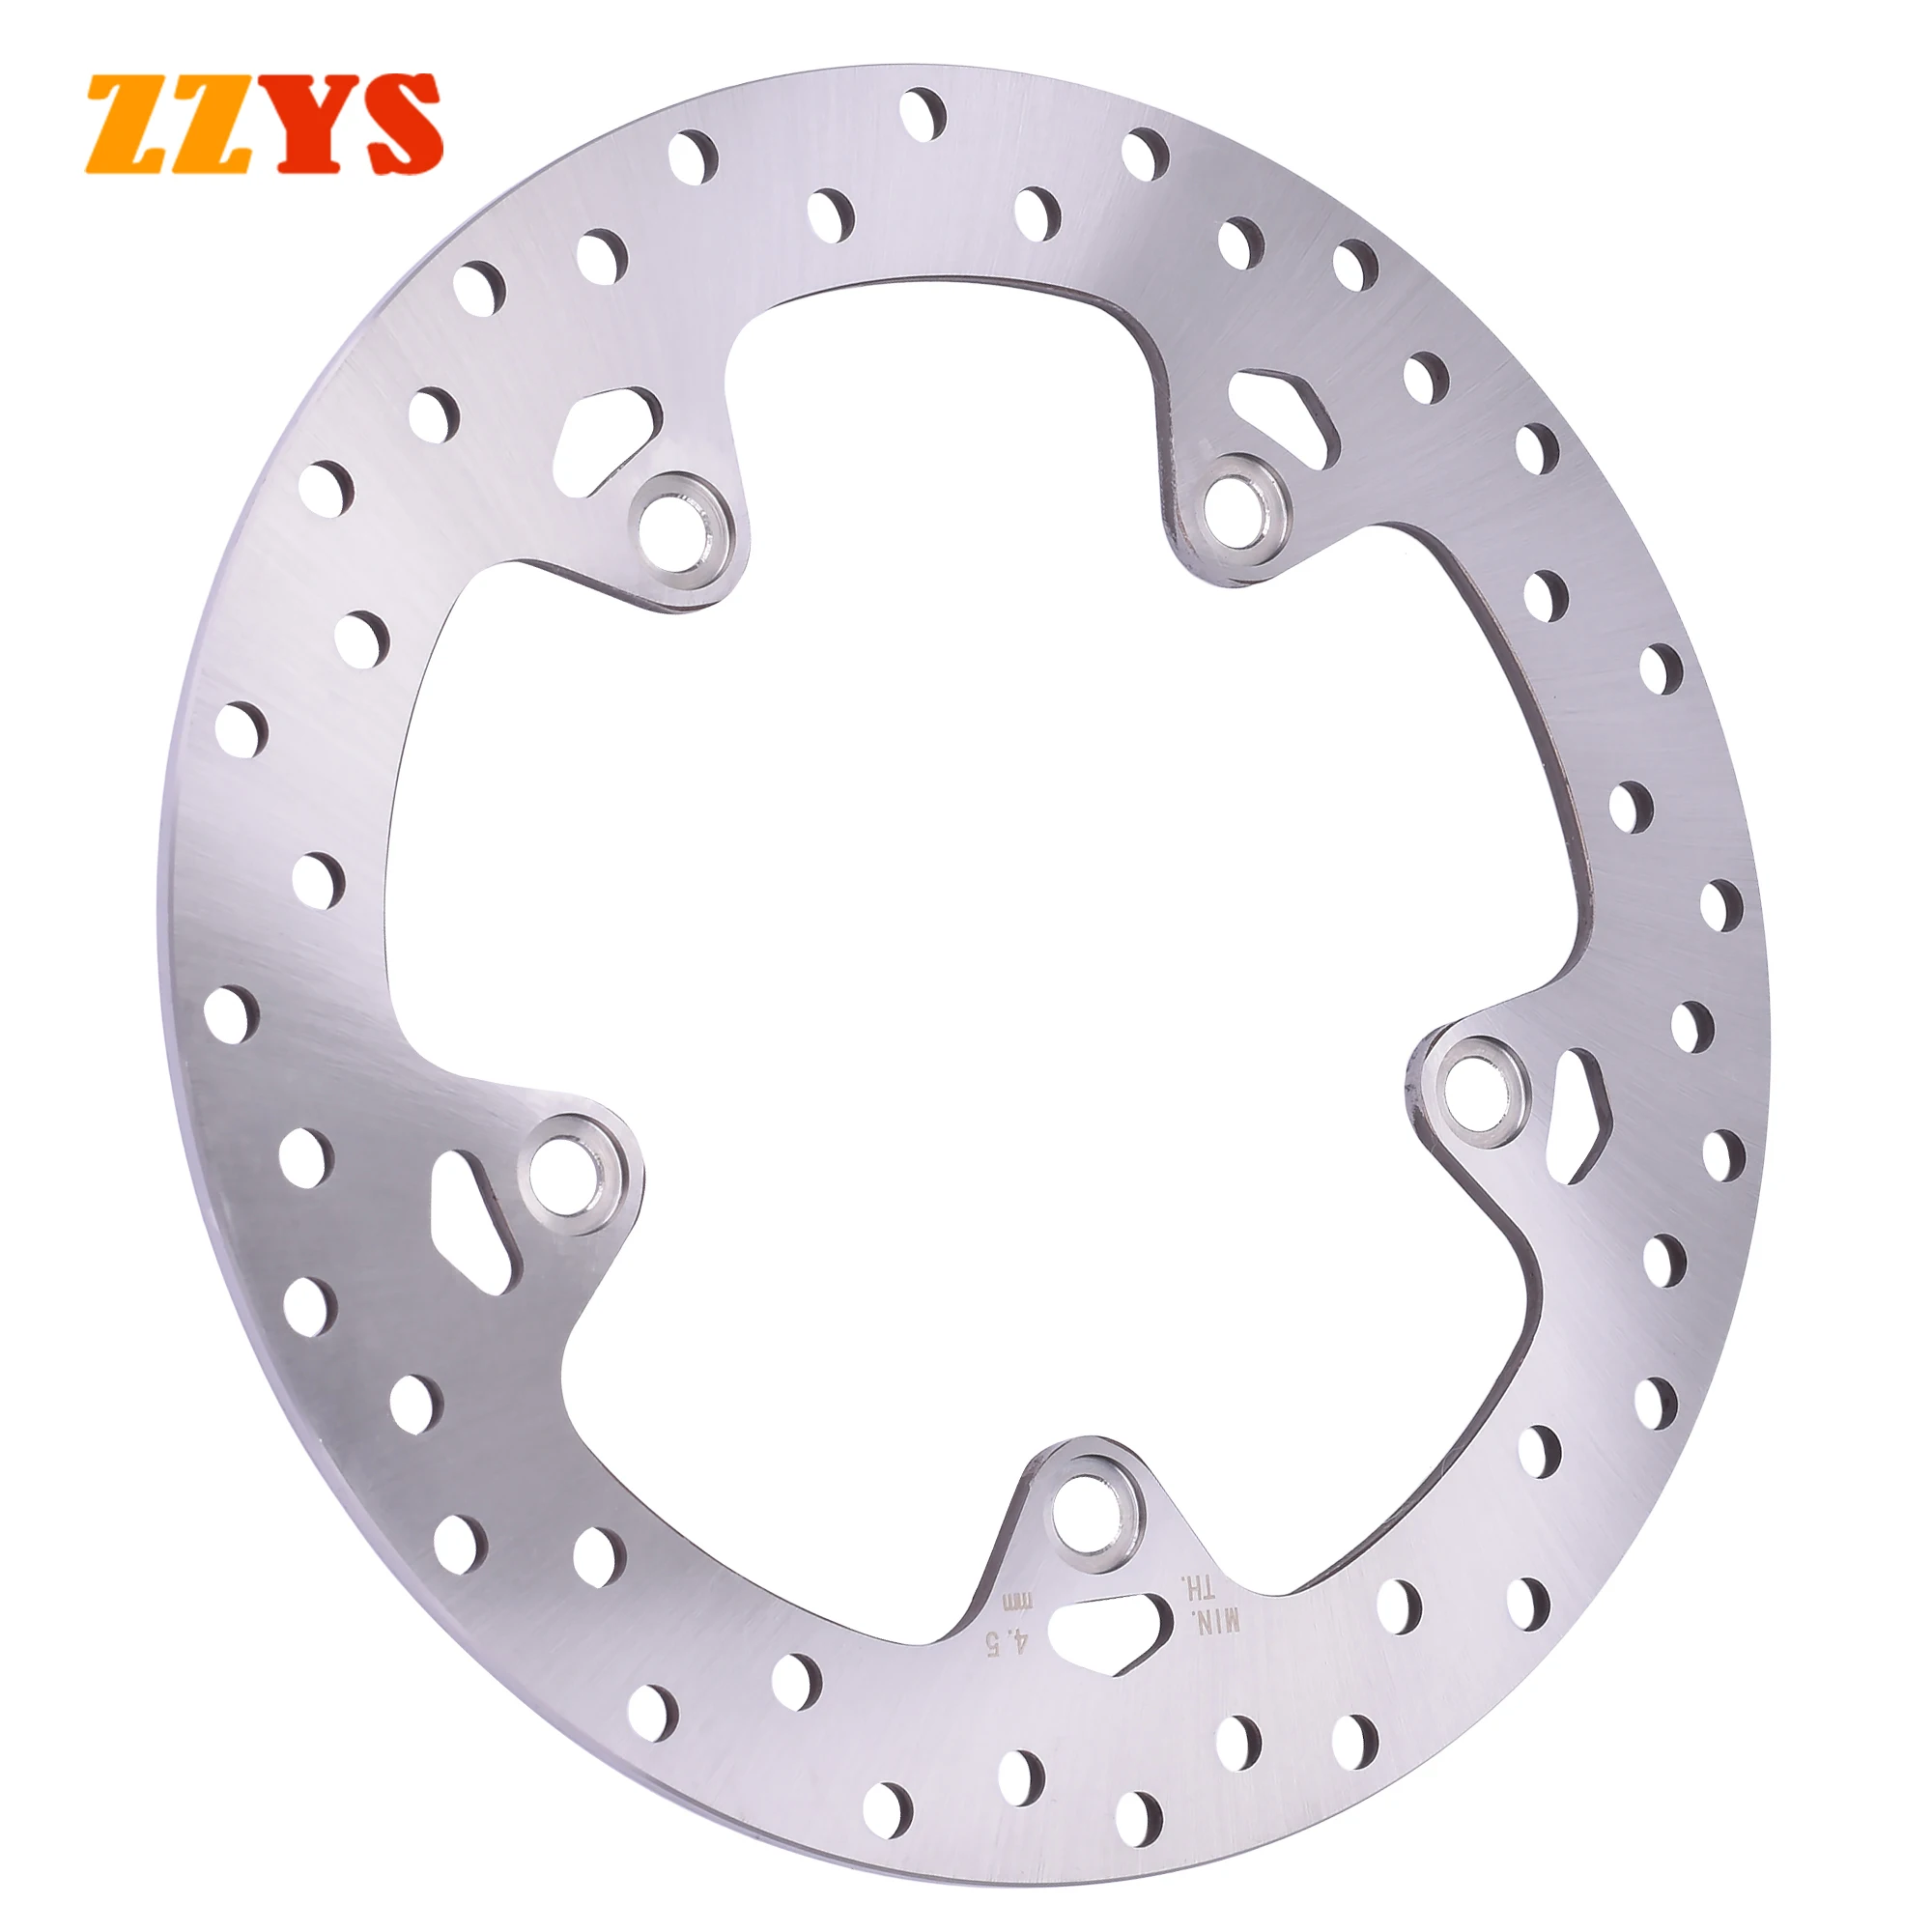 Motorcycle 265mm Rear Brake Discs Rotors For BMW R1200GS F800 F800R F800GT F800S F800ST E8ST F 800 R1200 R 1200 Brake Disc Rotor